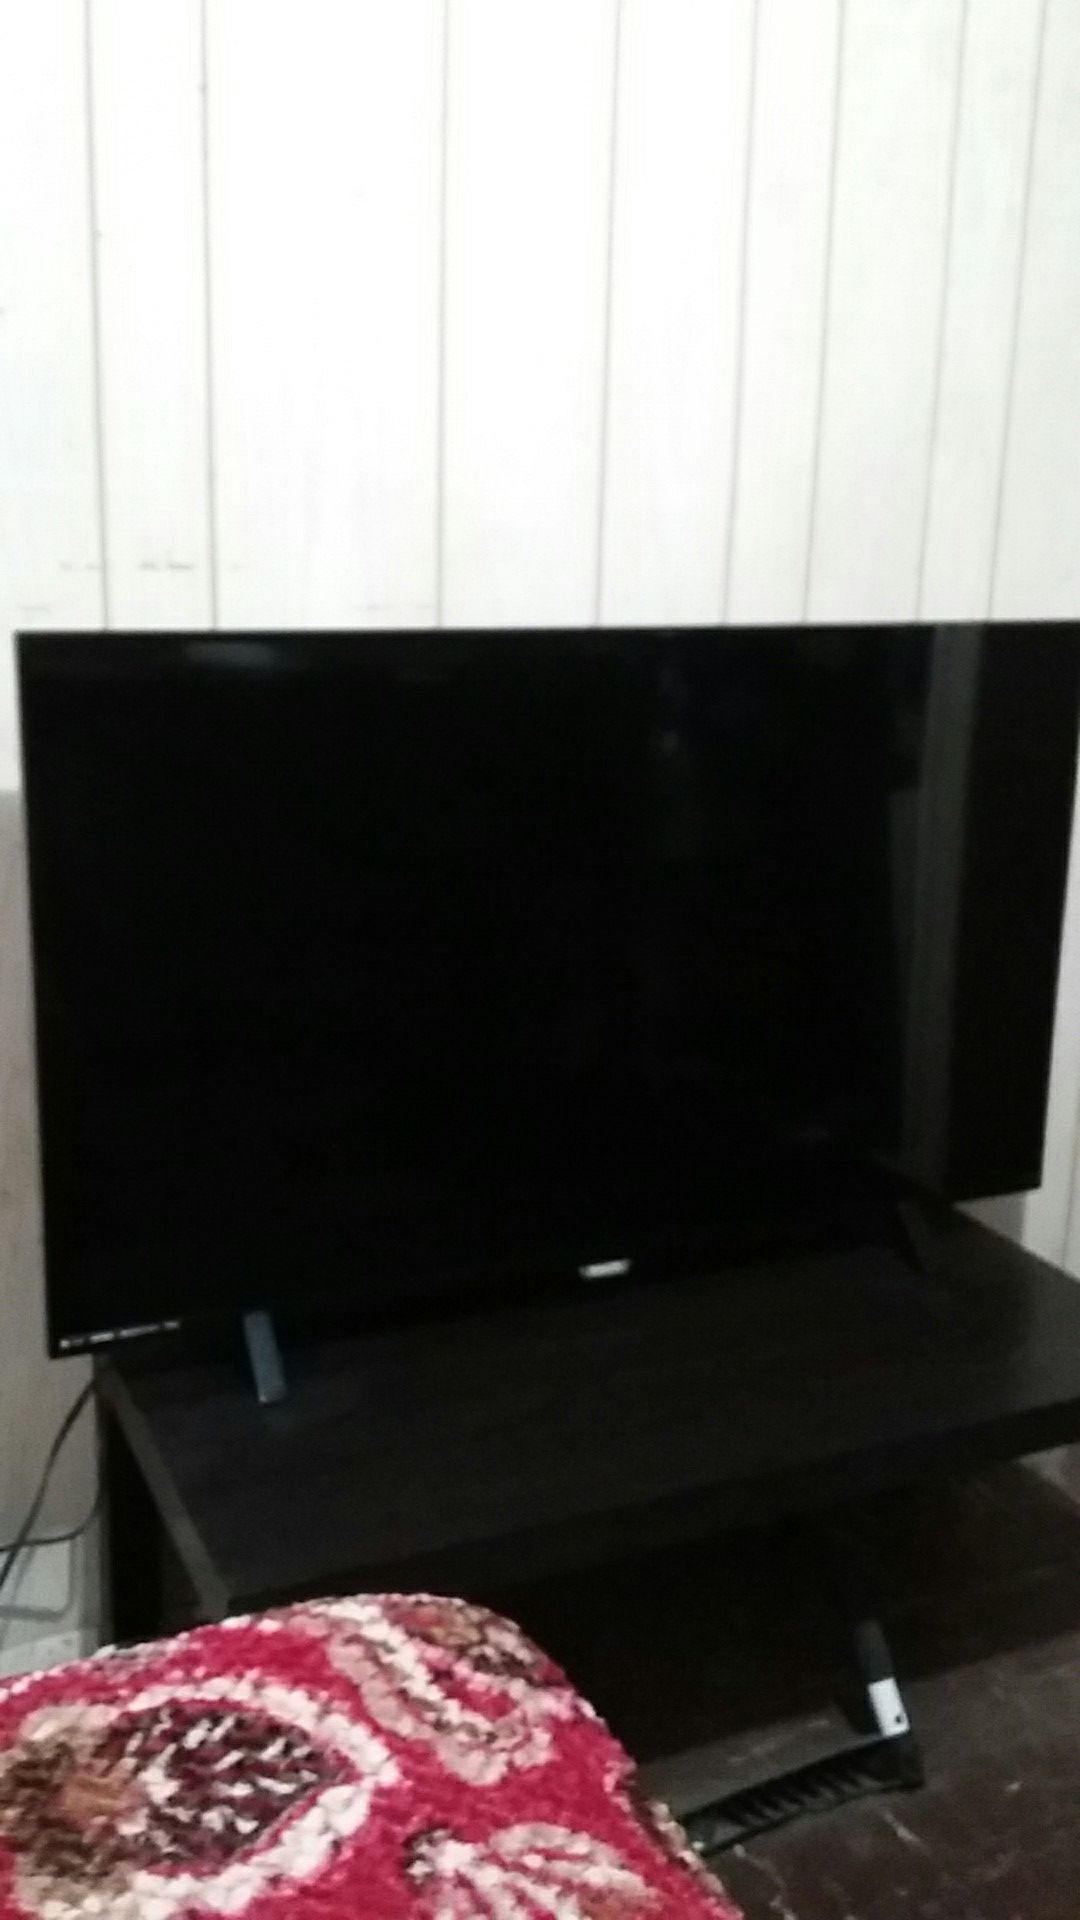 RARELY USED 50 inch Phillips TV. Bought it for $350 and I'm selling it for $80. May need a new controller.